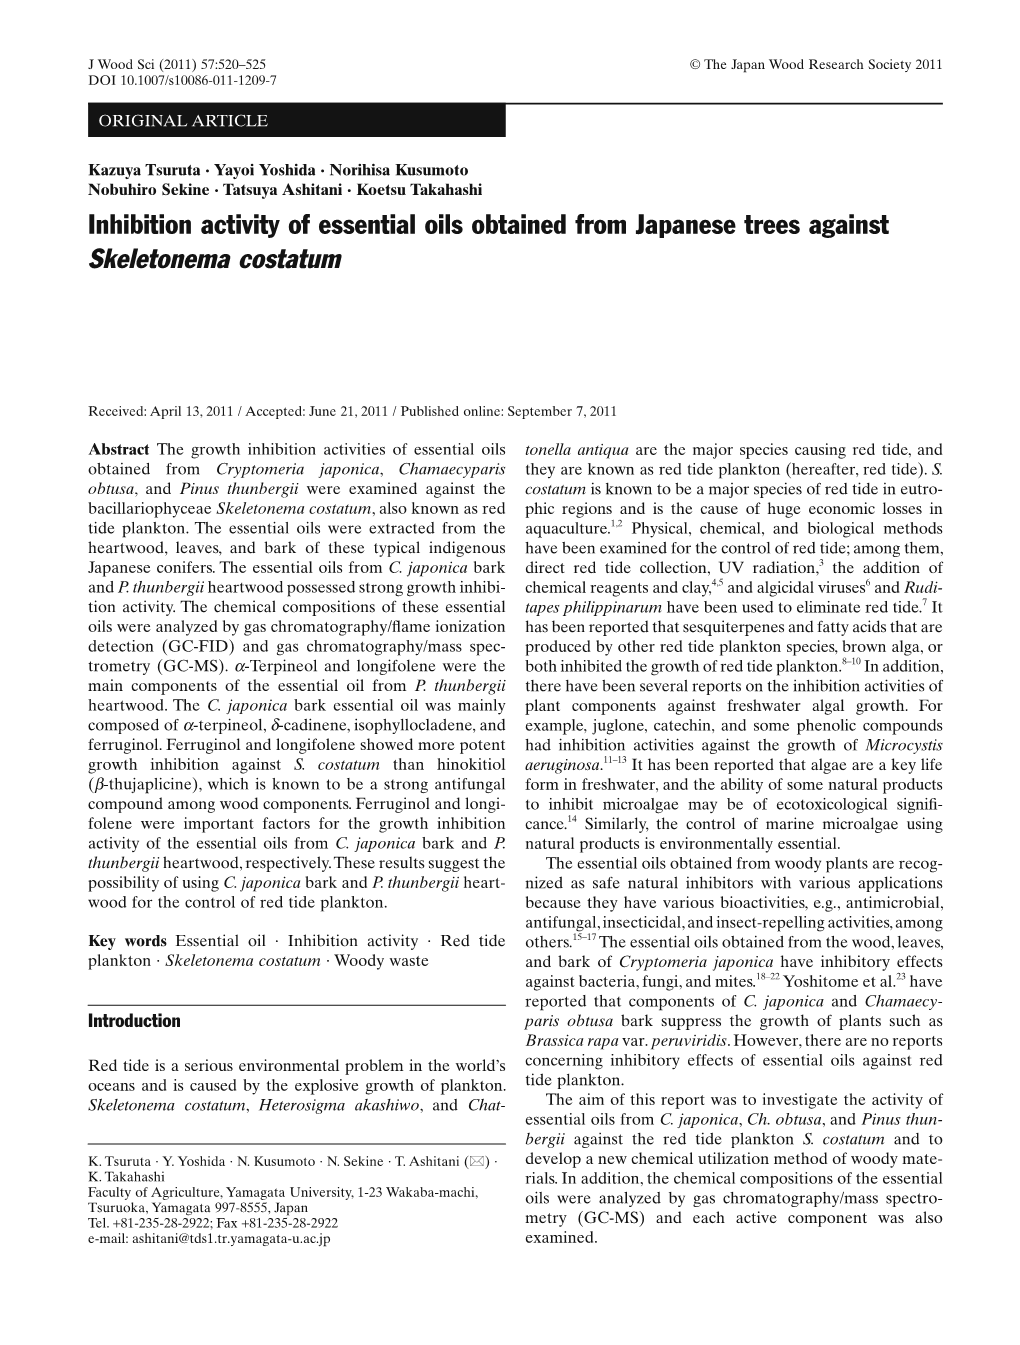 Inhibition Activity of Essential Oils Obtained from Japanese Trees Against Skeletonema Costatum